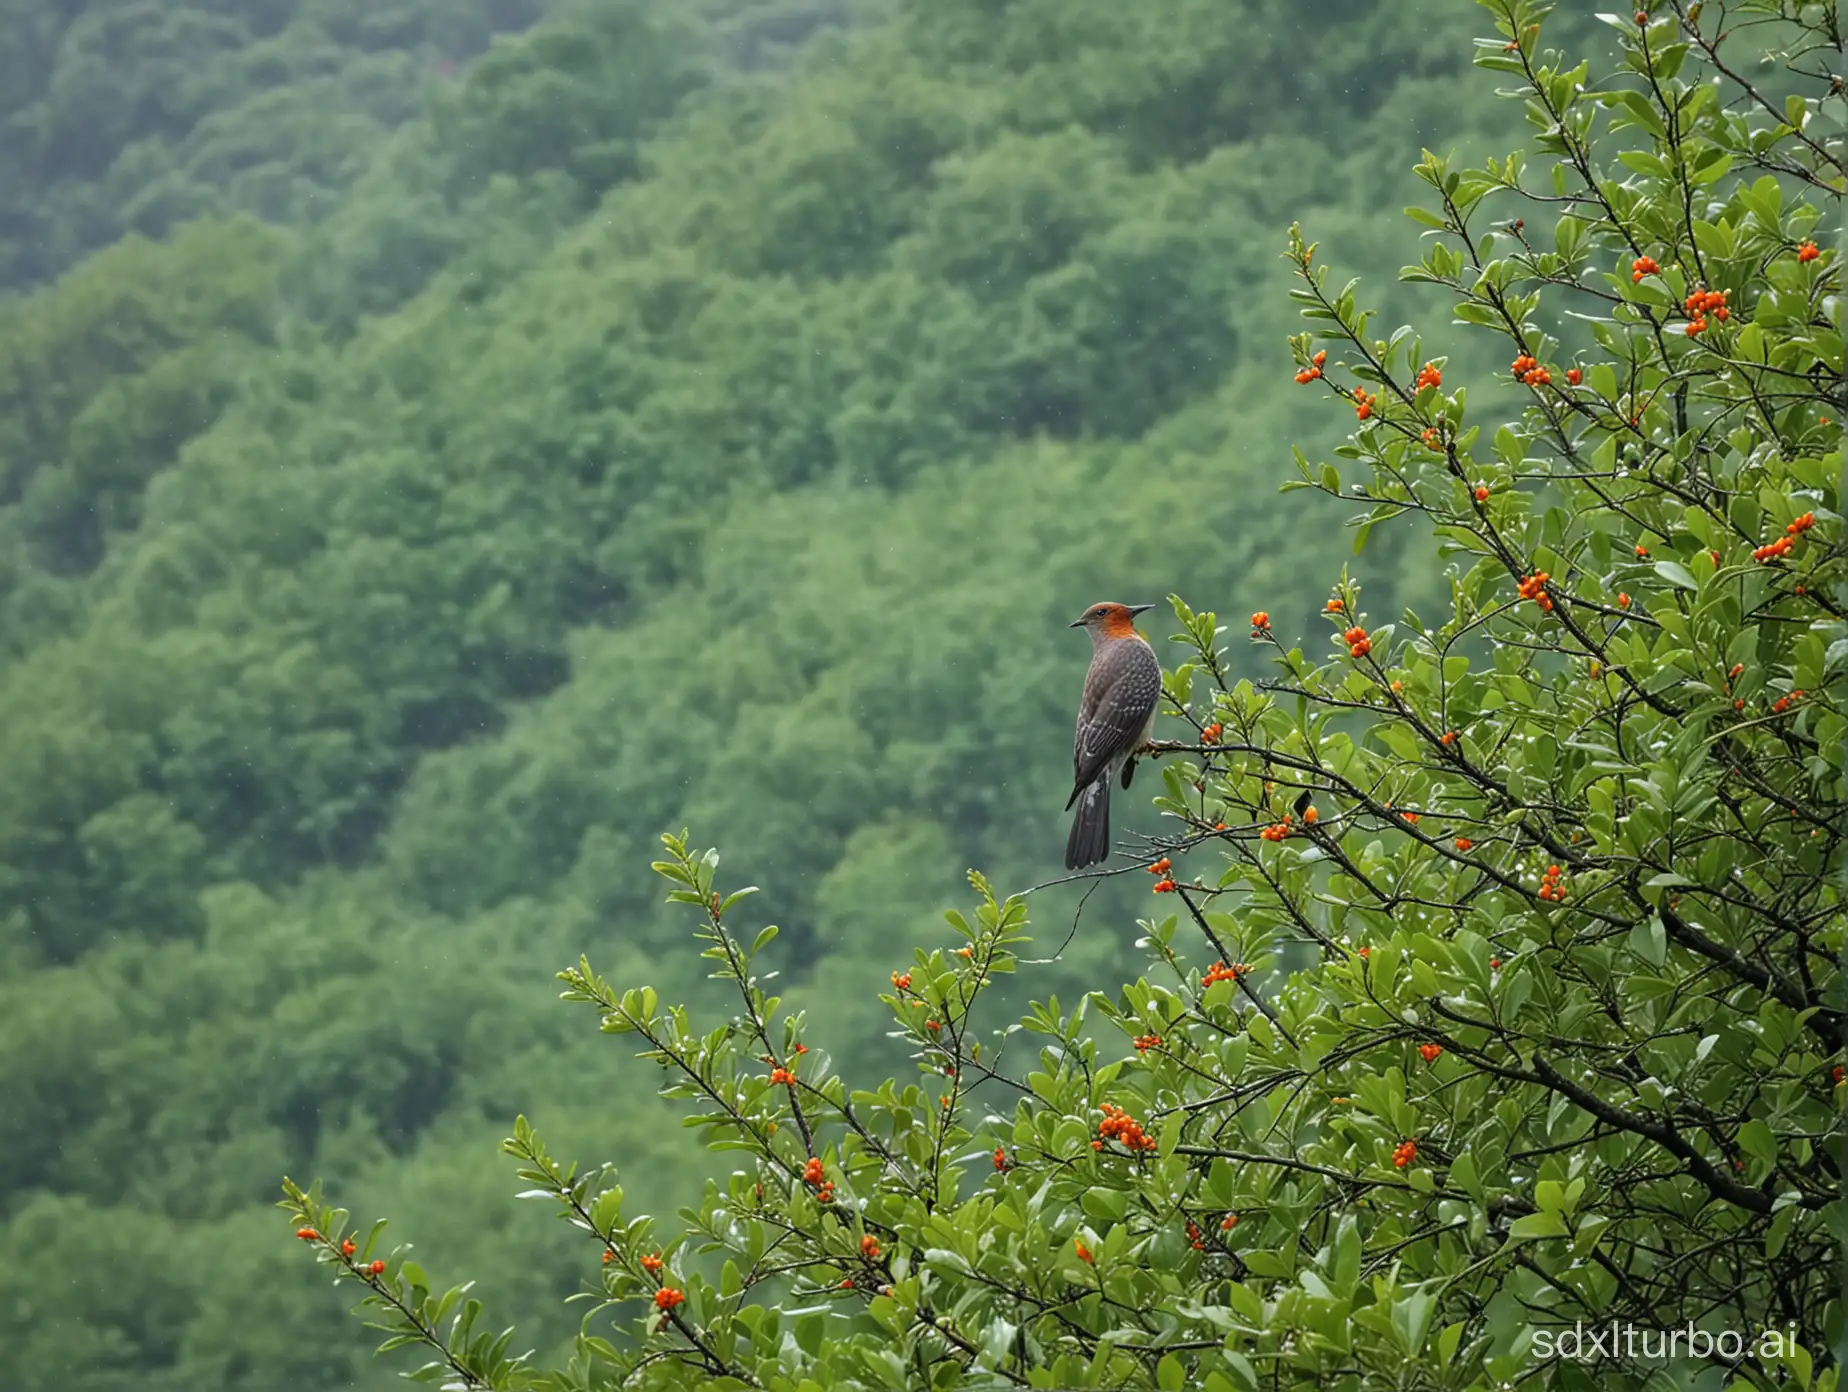 Mountain-Cuckoo-Reflecting-in-Green-Bushes-After-the-Rain